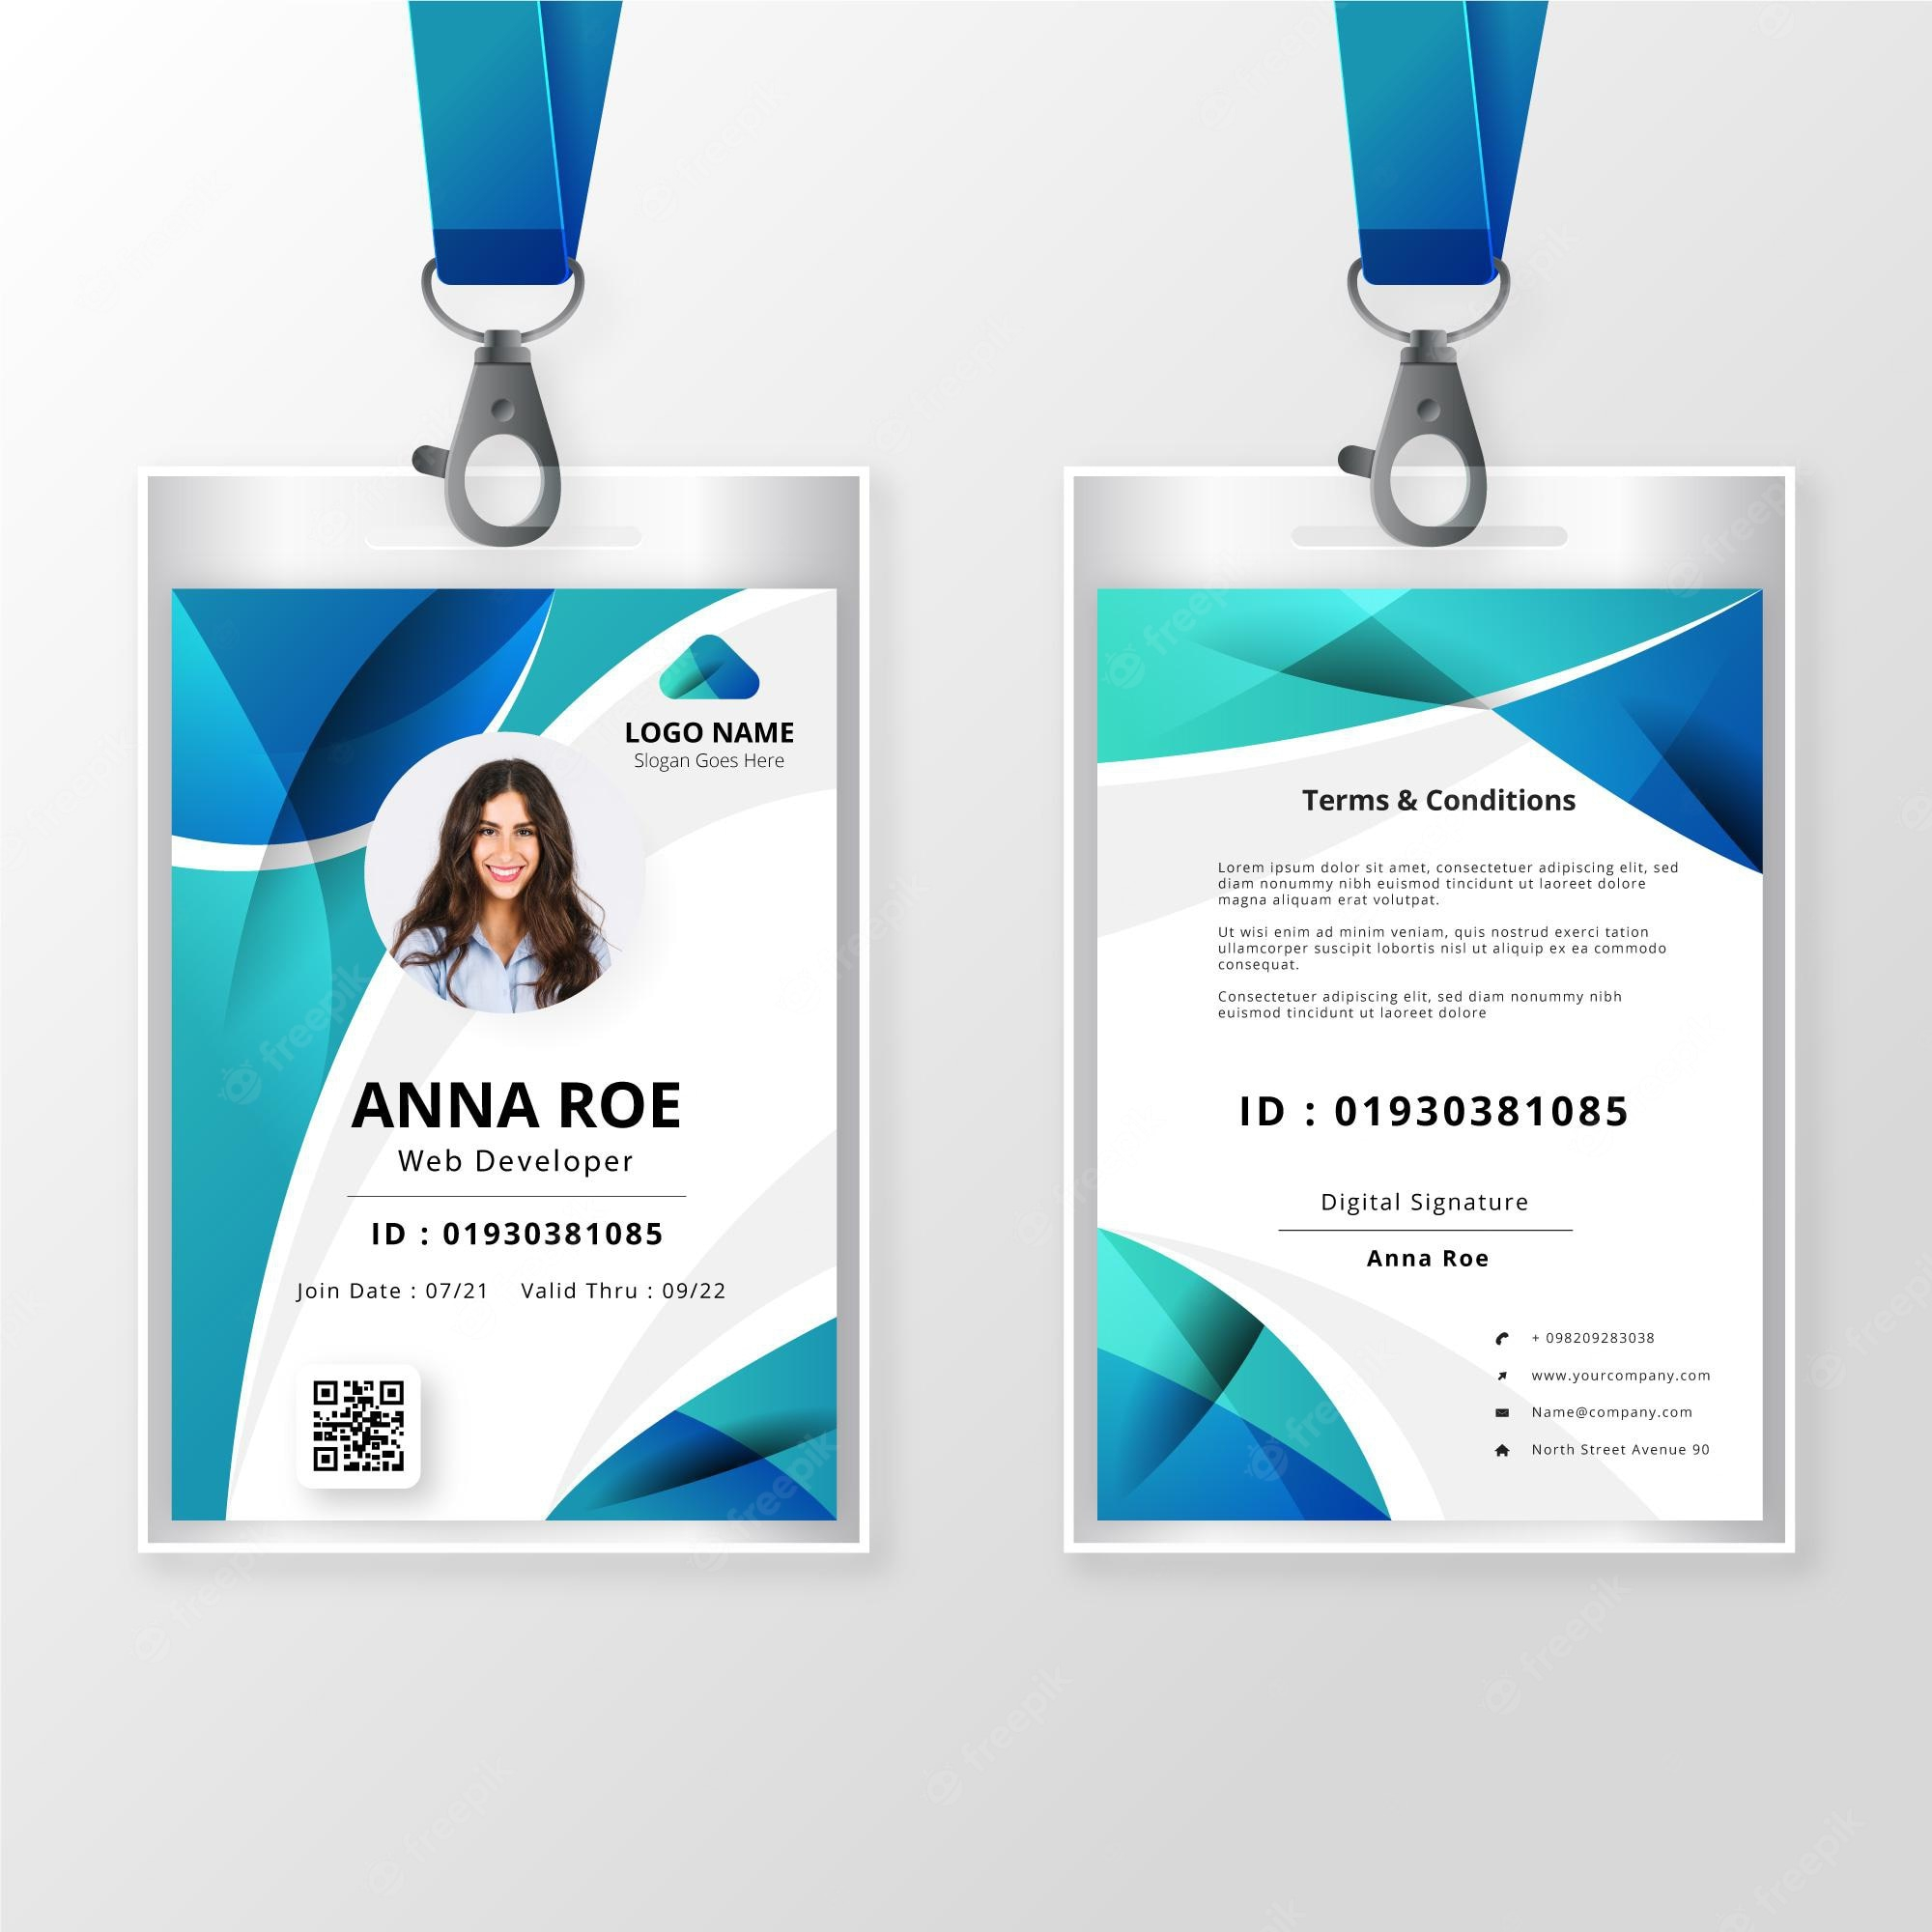 Id card Images - Free Download on Freepik Intended For Blank Social Security Card Template Download